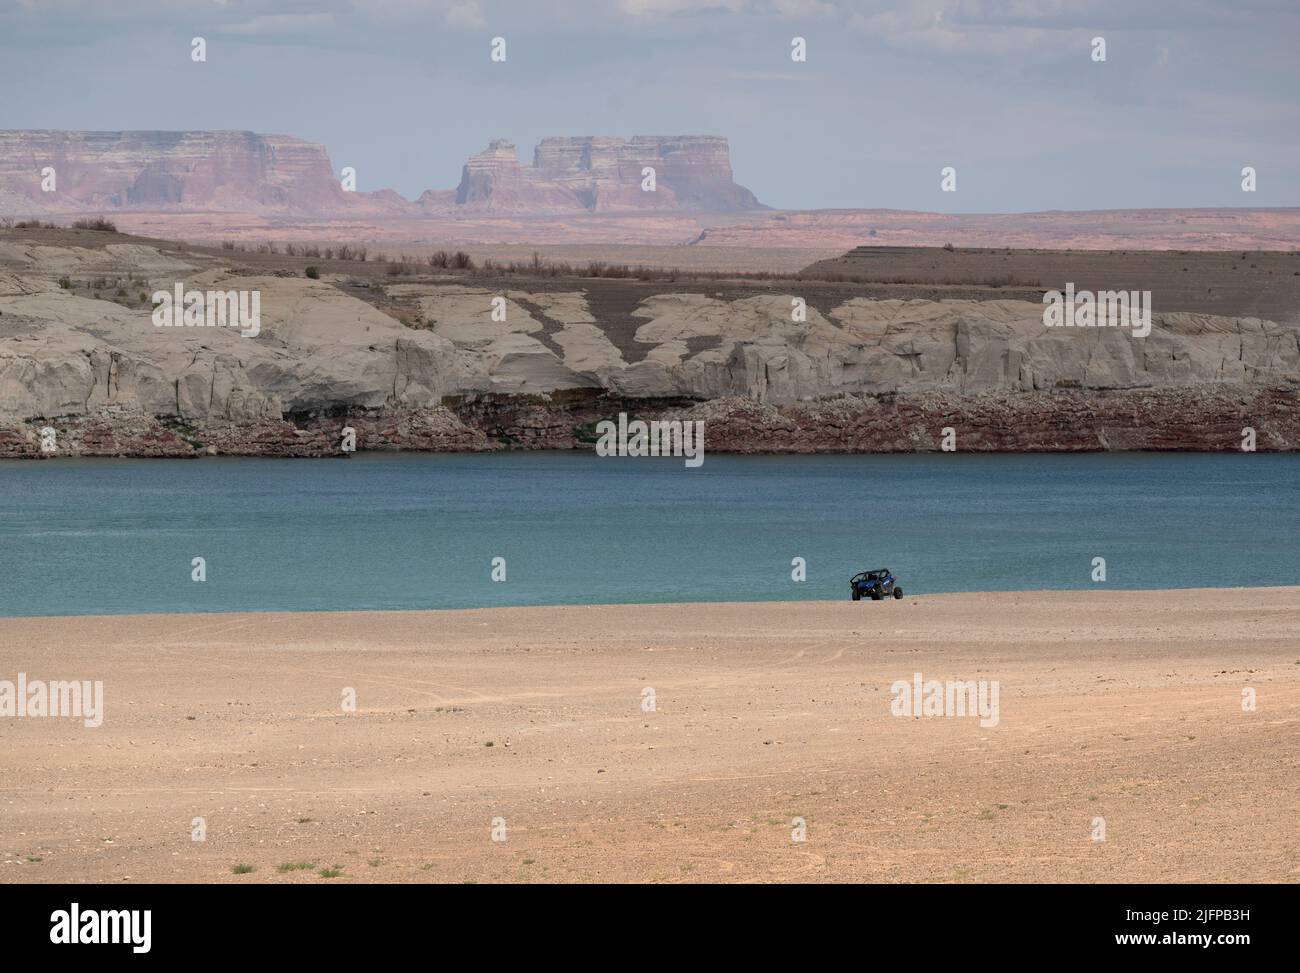 June 30, 2022 - Glen Canyon National Recreation Area, Utah, U.S. - A dune buggy rides on an area of Lake Powell that used to be underwater is now dry at Lone Rock Beach on June 30, 2022 in Big Water, Utah. As severe drought grips parts of the Western United States, water levels at Lake Powell have dropped to their lowest levels since the lake was created by damming the Colorado River in 1963. The Colorado River Basin connects Lake Powell and Lake Mead and supplies water to 40 million people in seven western states. (Credit Image: © David Becker/ZUMA Press Wire) Stock Photo